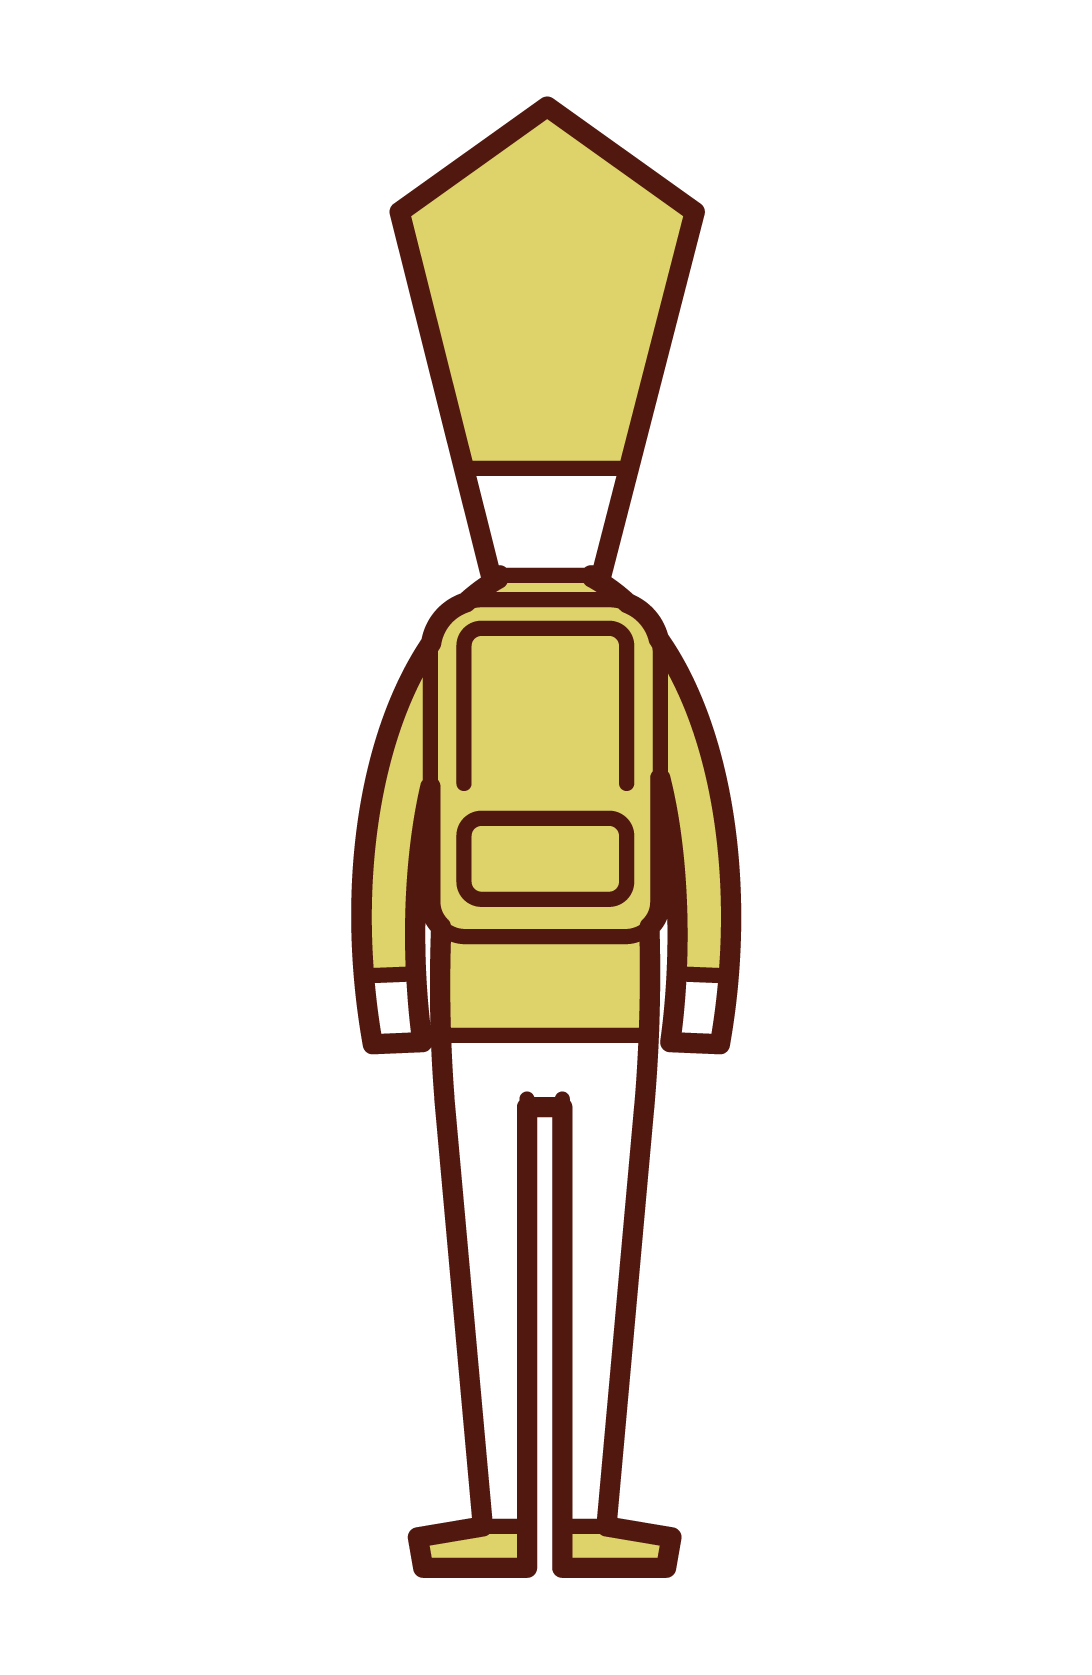 Illustration of the back of a man carrying a rucksack